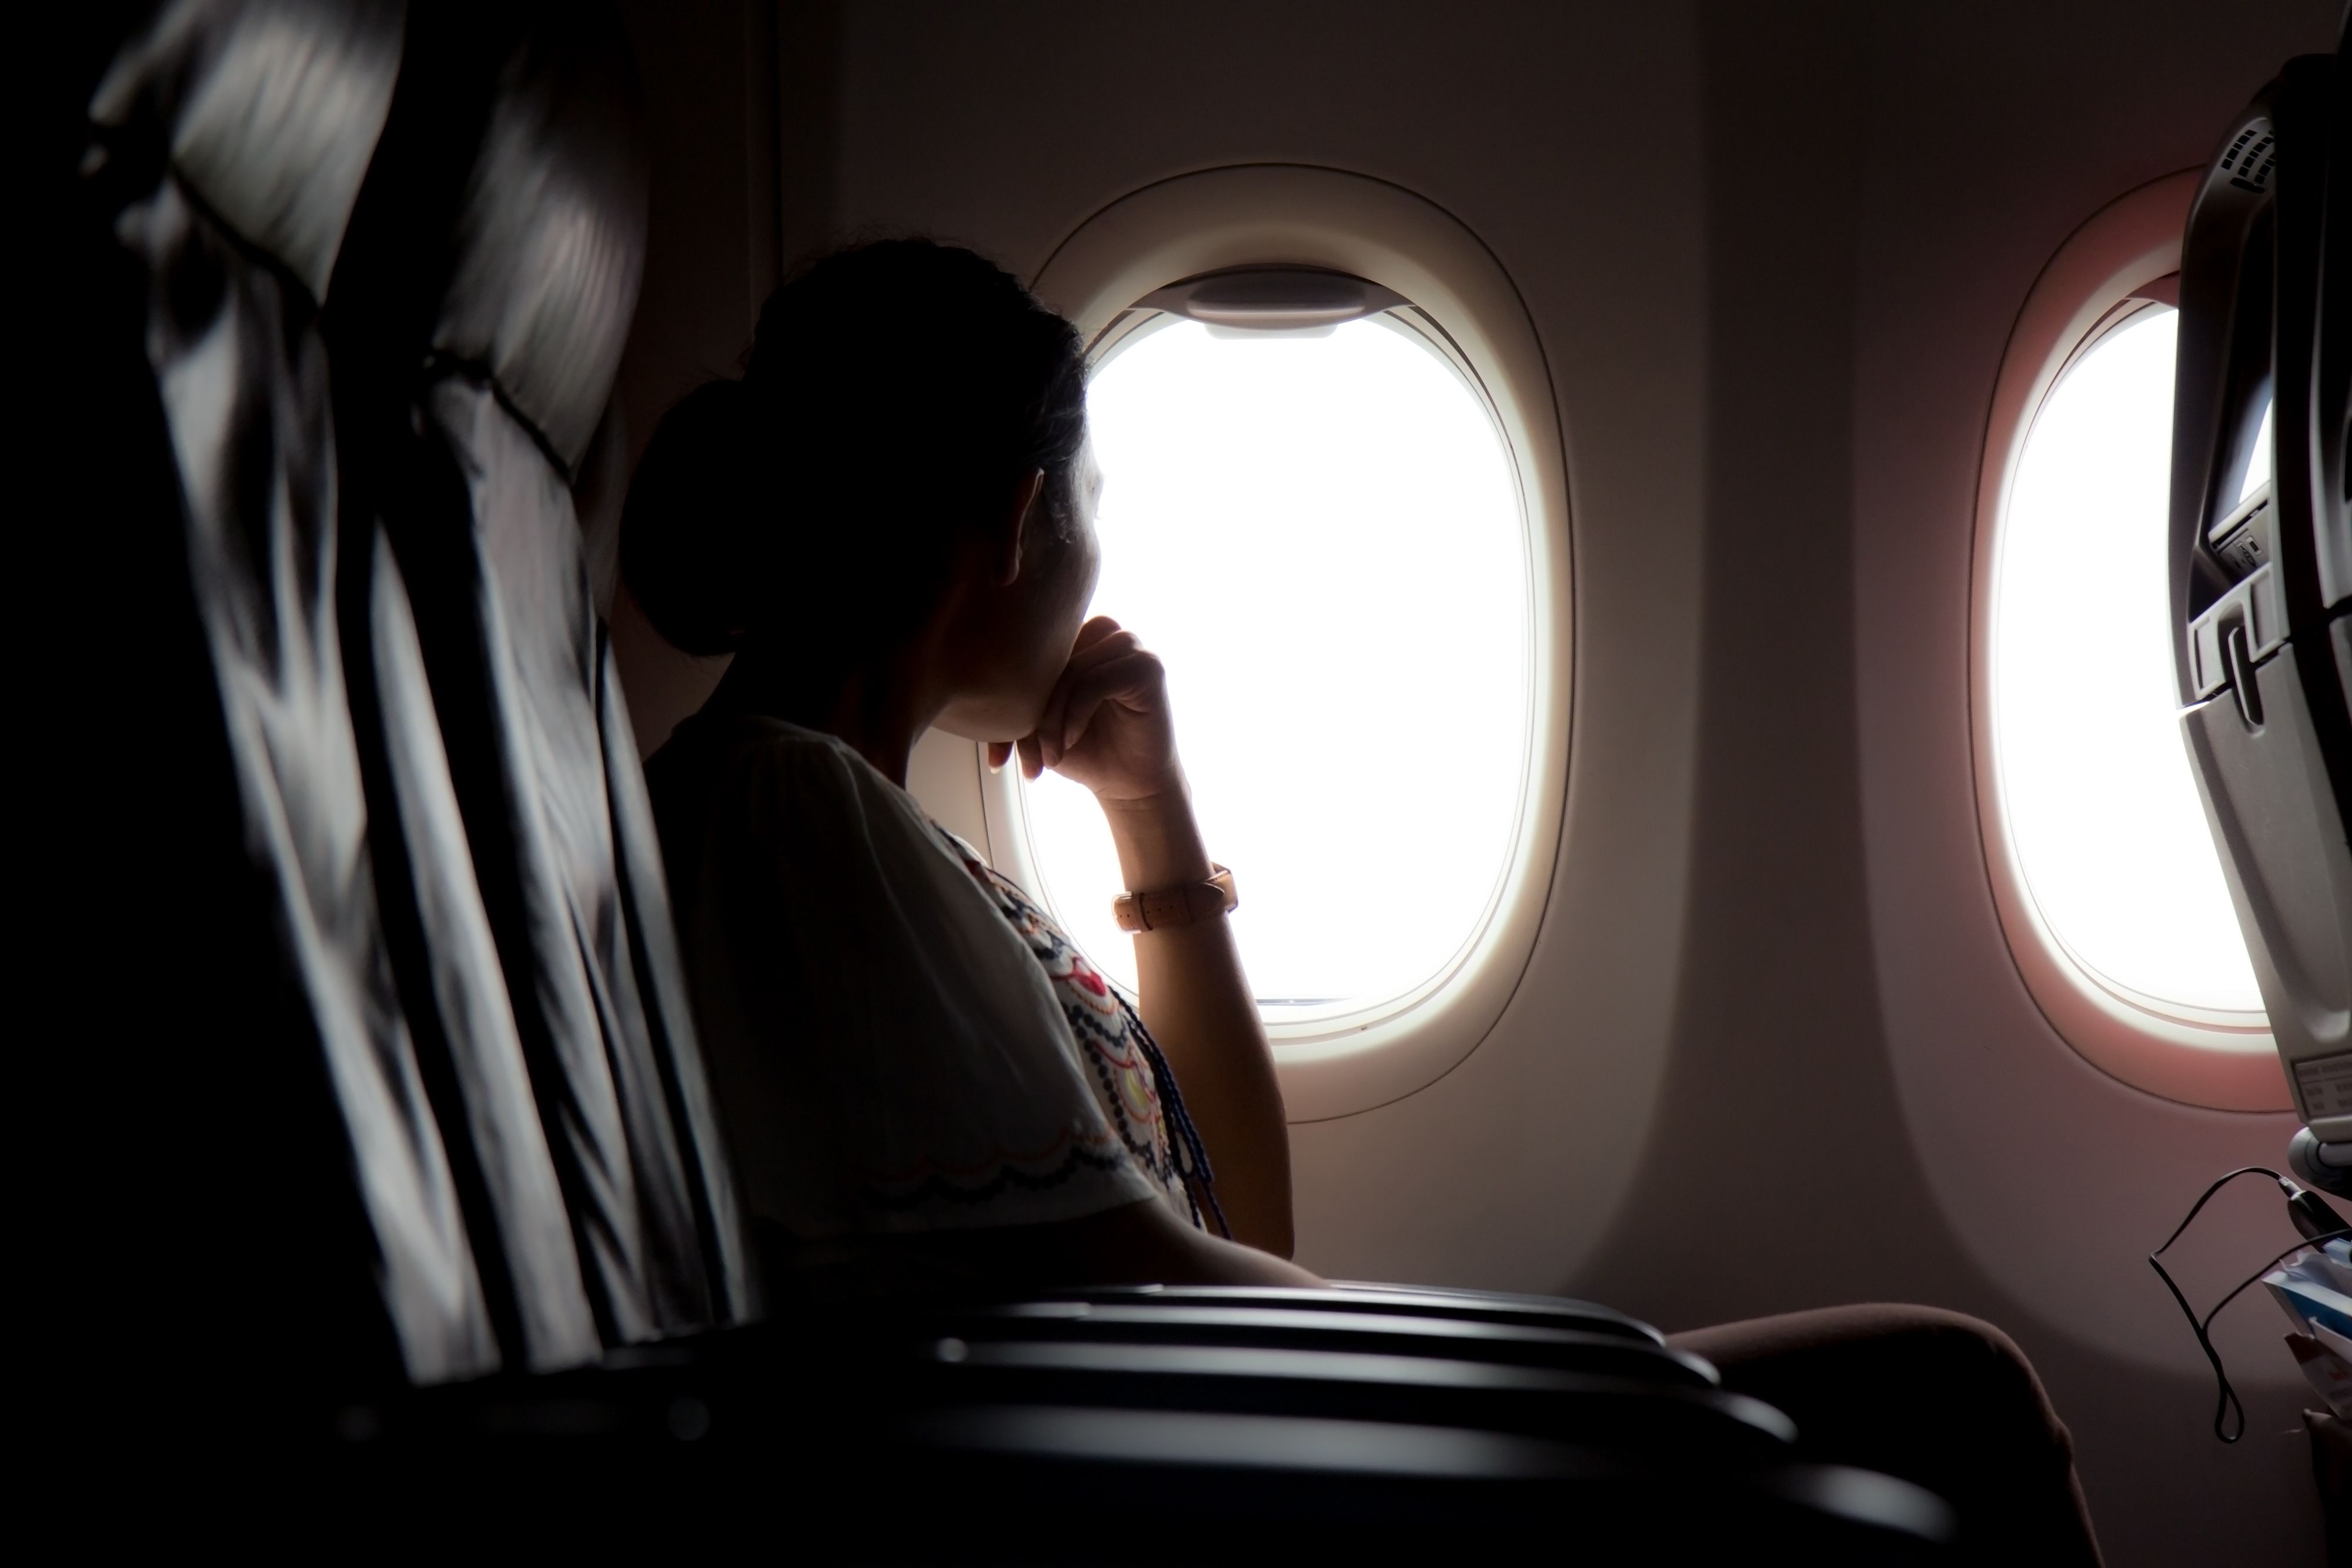 A passenger looking out of the window of an airliner.